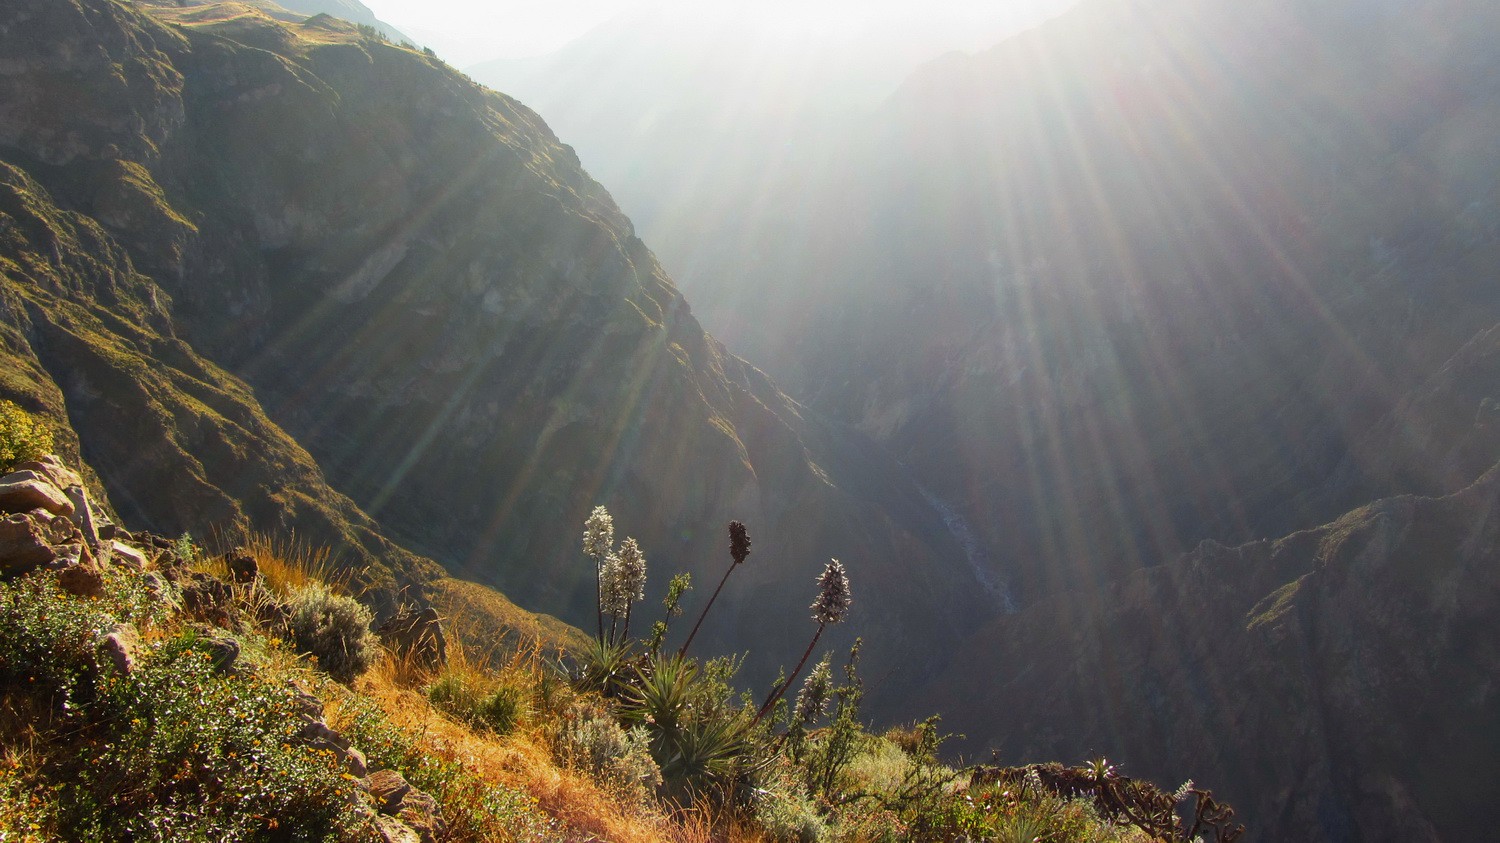 The deepest section of the Colca Canyon